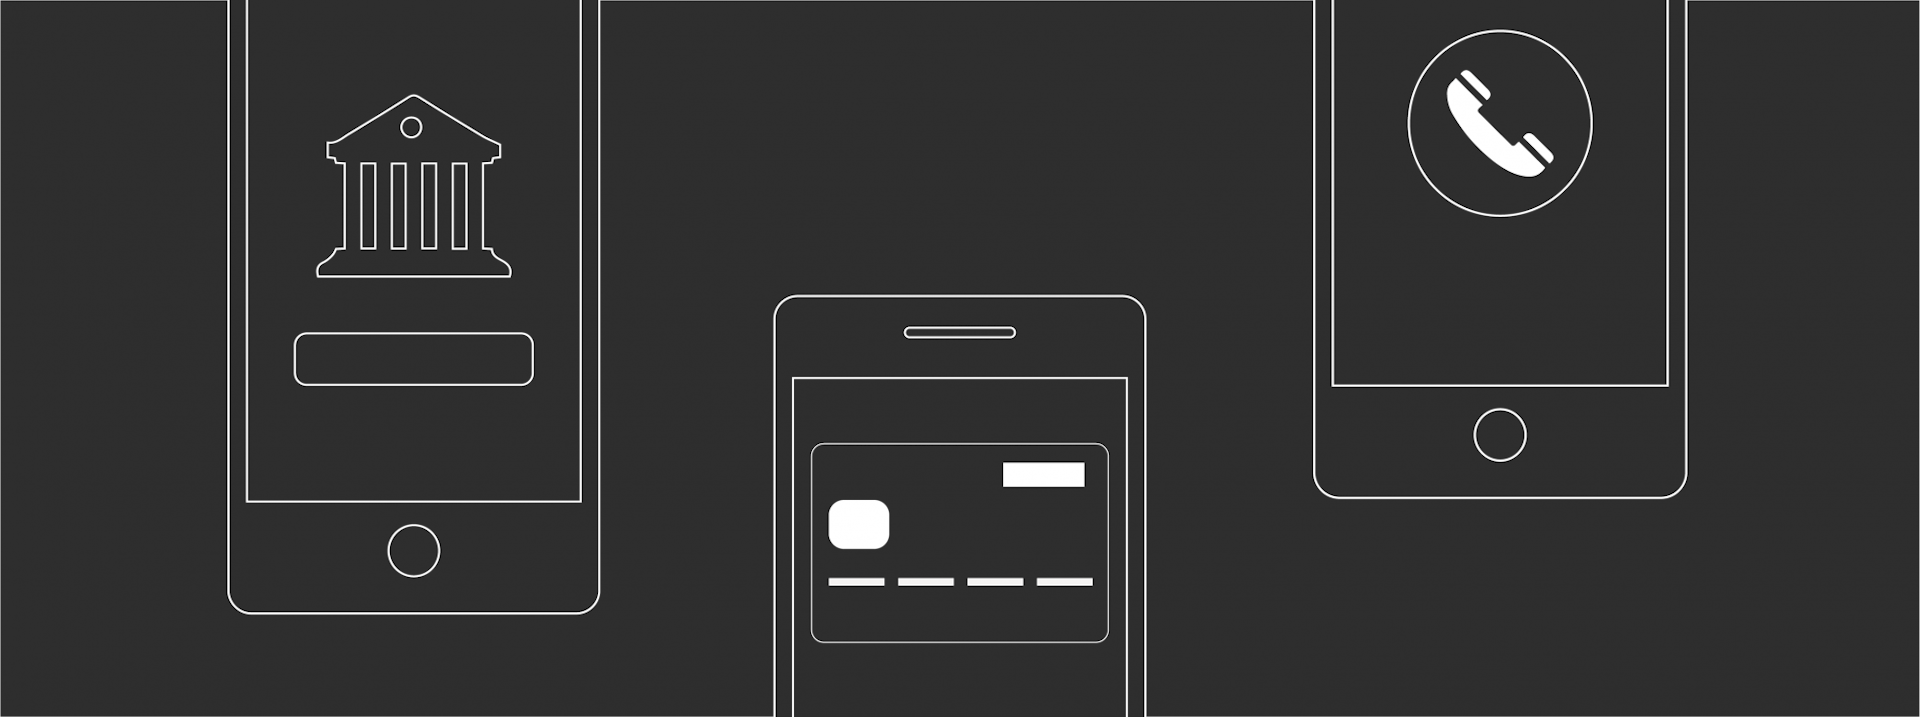 Illustration of iPhones with banking and phone call icons on the screen.